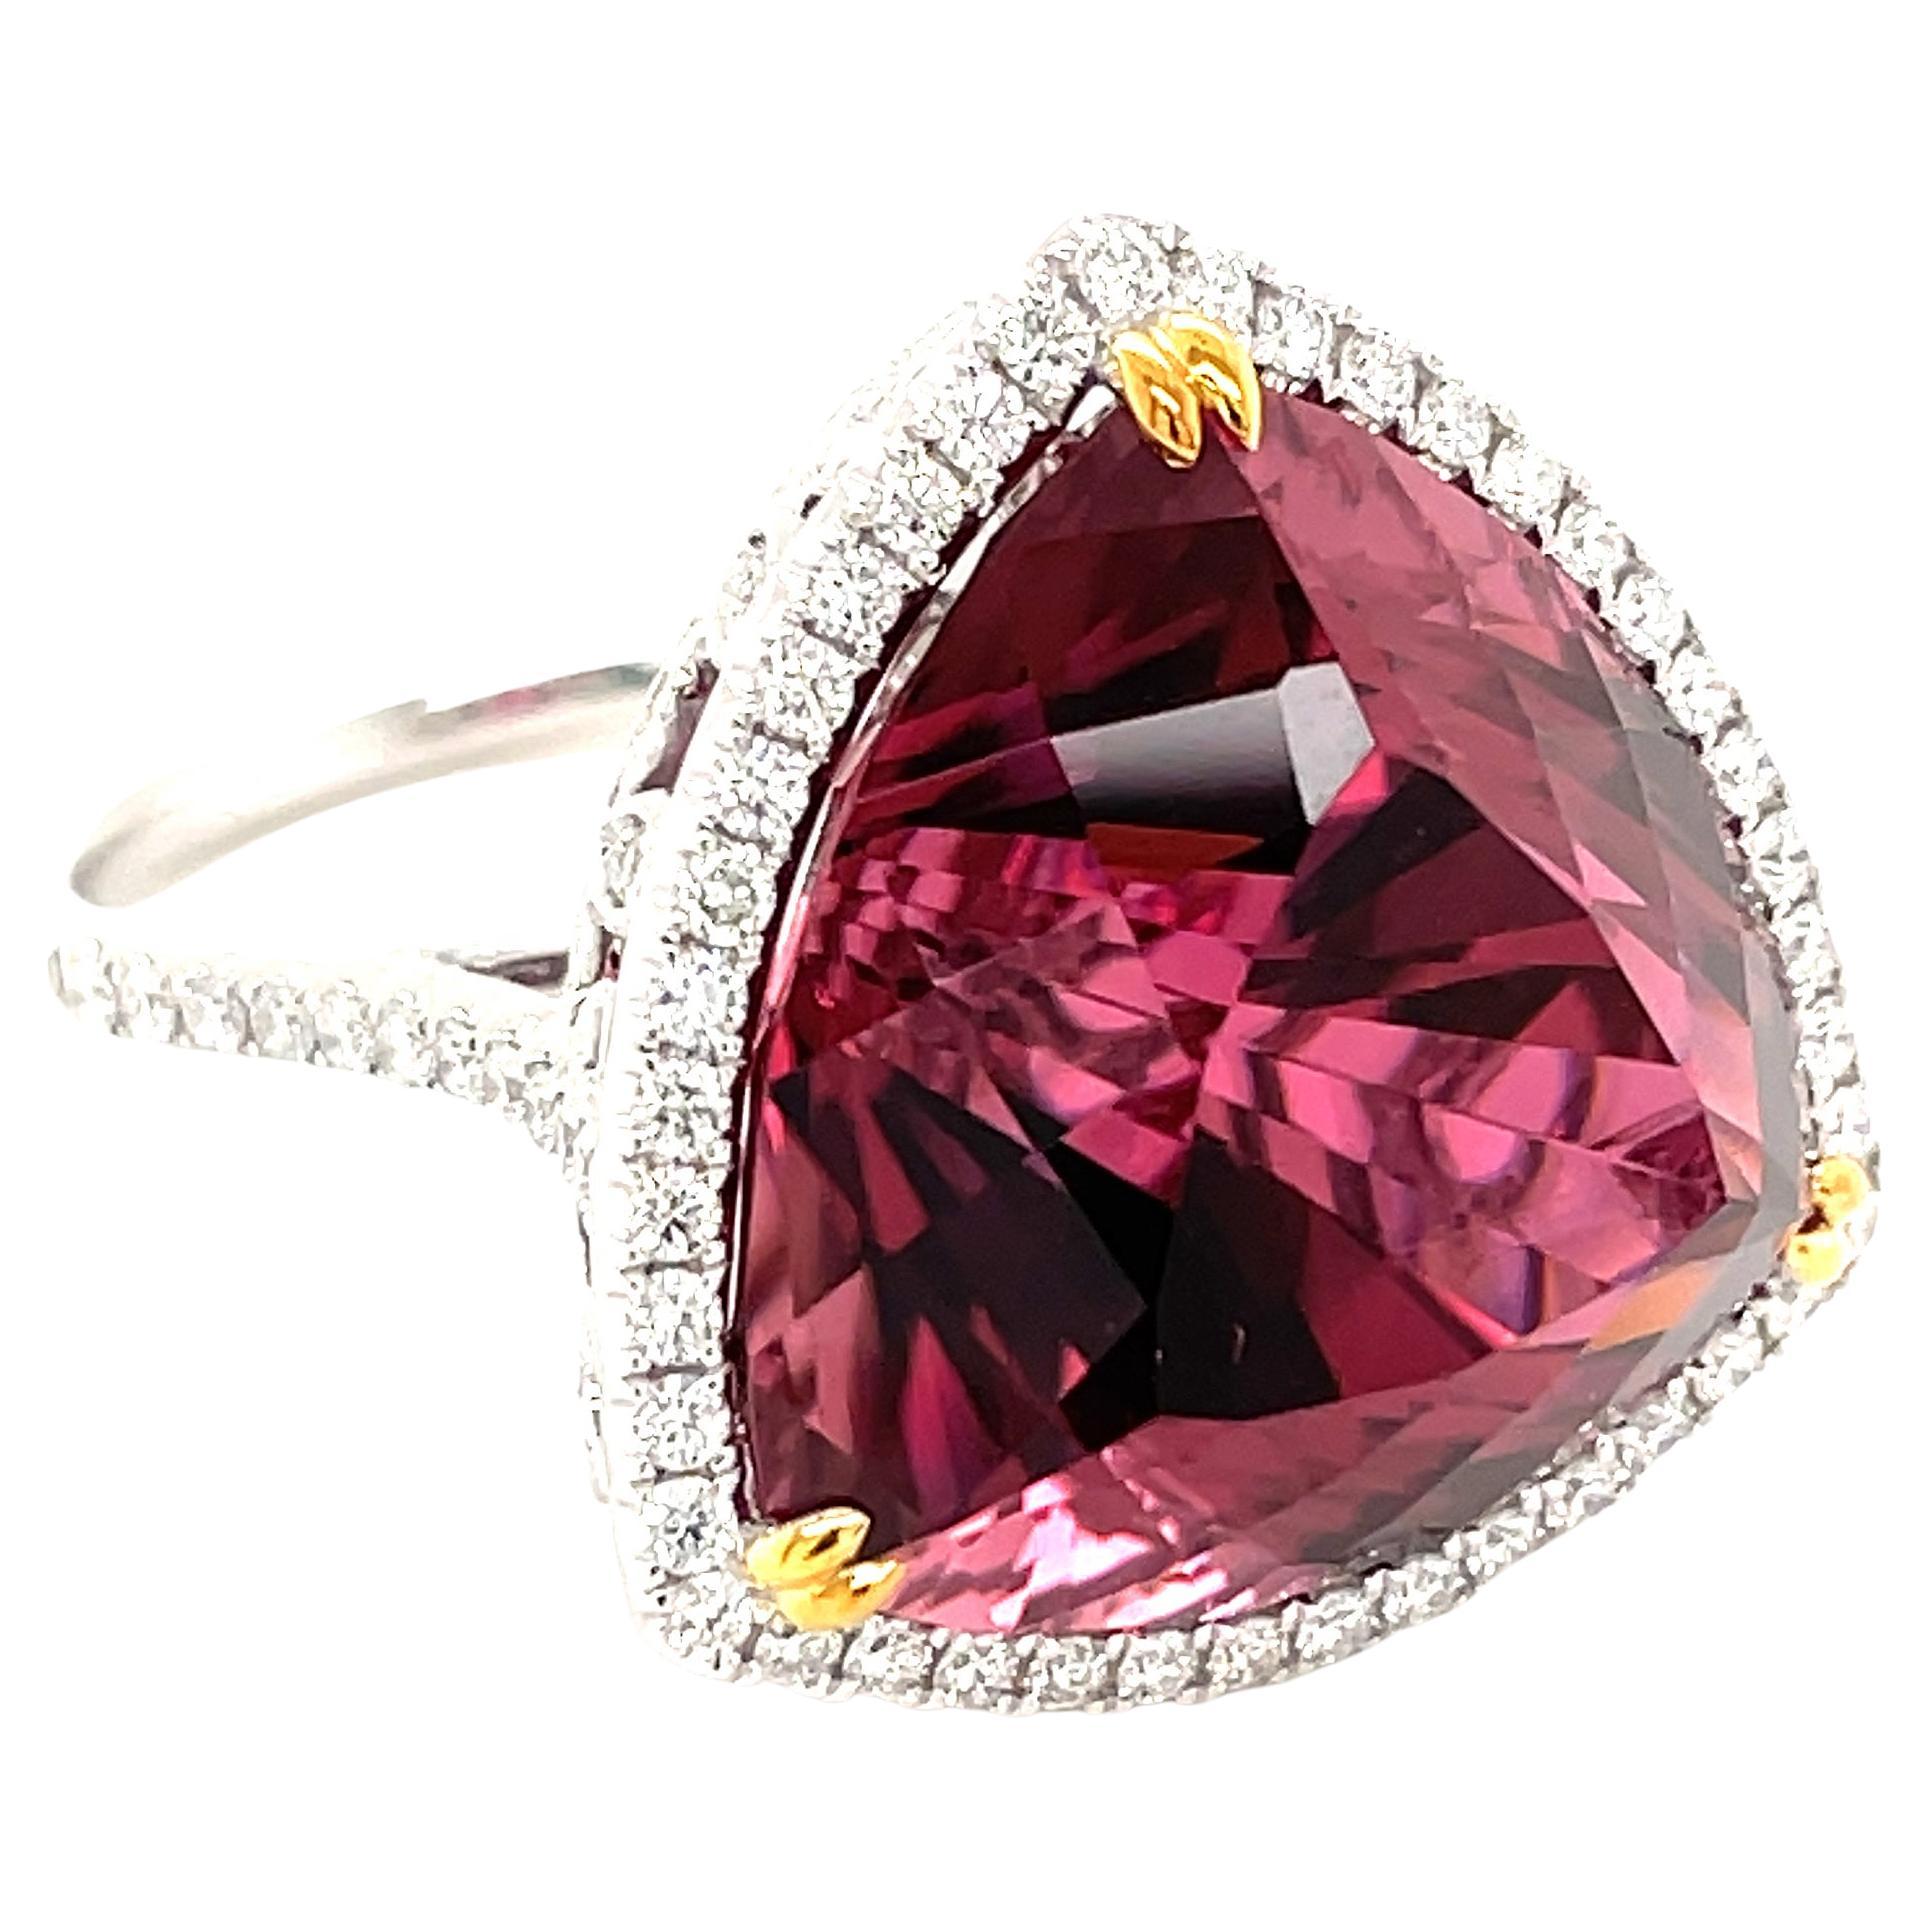 This stunning cocktail ring showcases a beautiful 24.42 Carat Trillion Cut Rubellite Tourmaline with a Diamond Halo on a Diamond Shank. This ring is set in 18k white gold, with 18k yellow gold prongs on the center stone.
Total Diamond Weight = 0.76